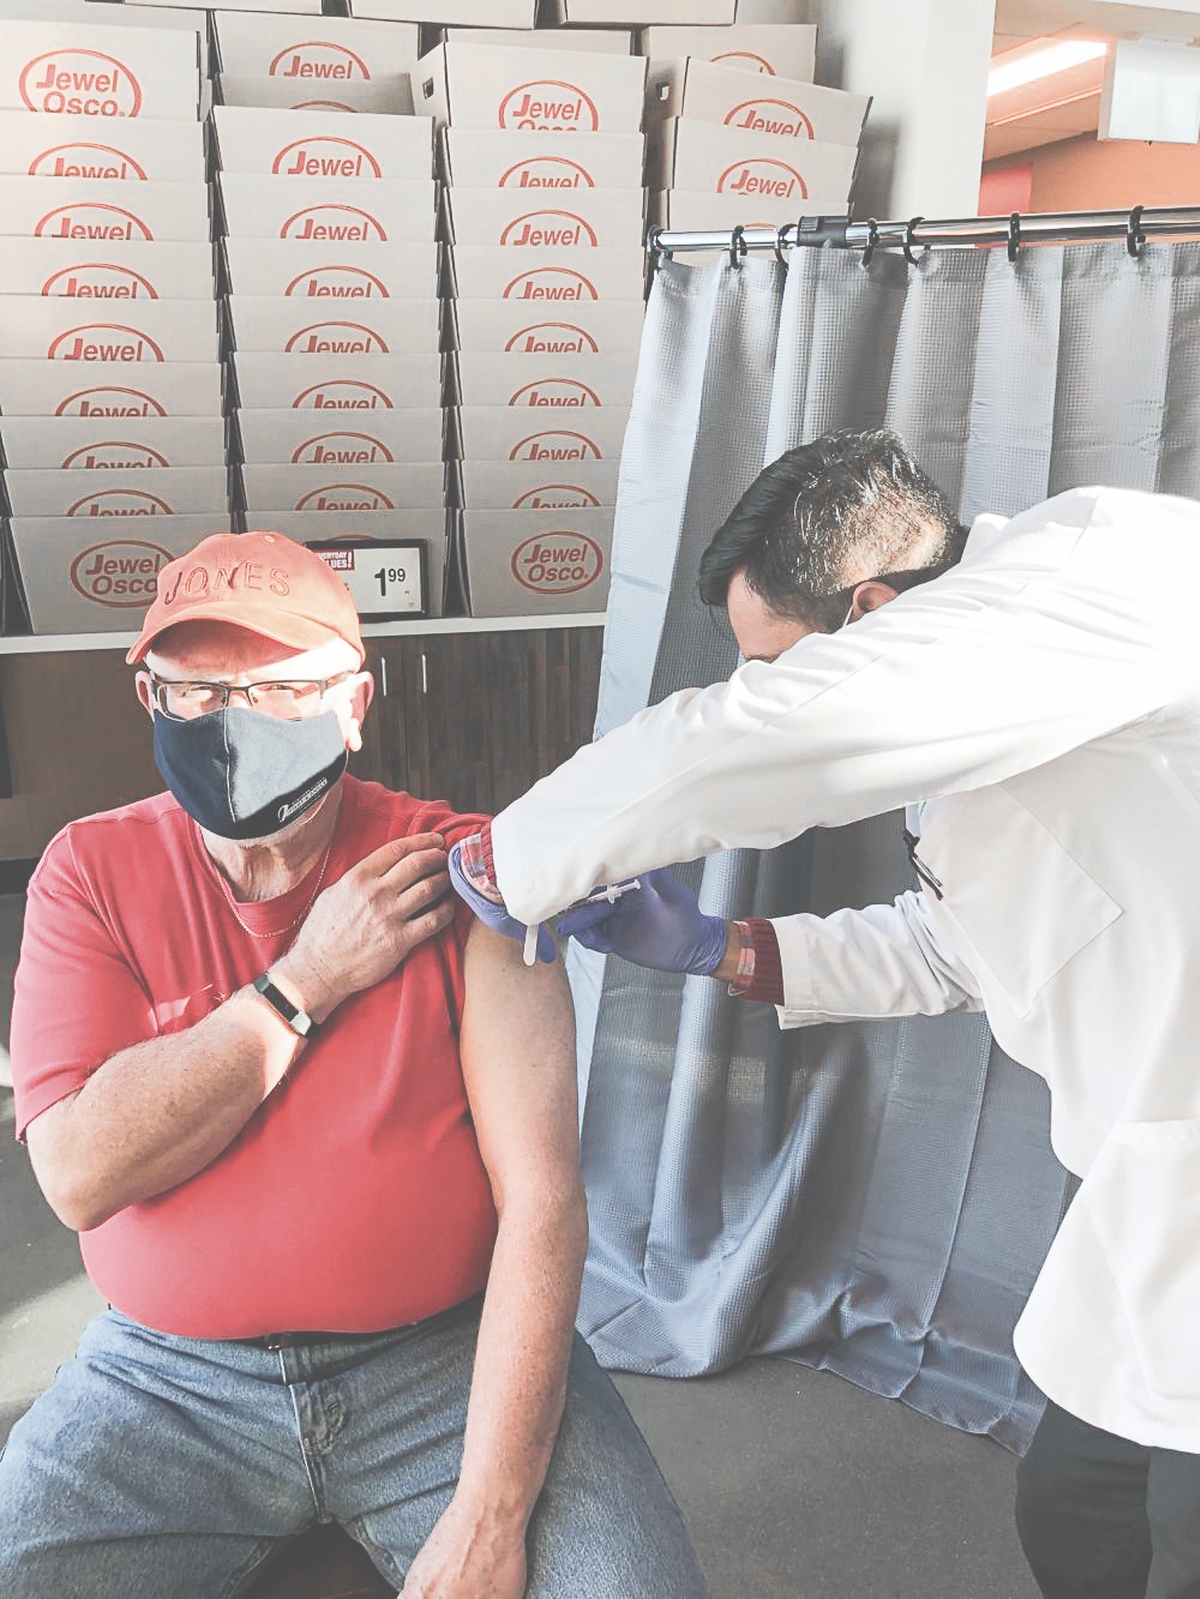 Sun City resident and military historian Mikek Ptak and happily receives his first dose of the Pfizer vaccine administered by Jewel-Osco. (Photo provided)